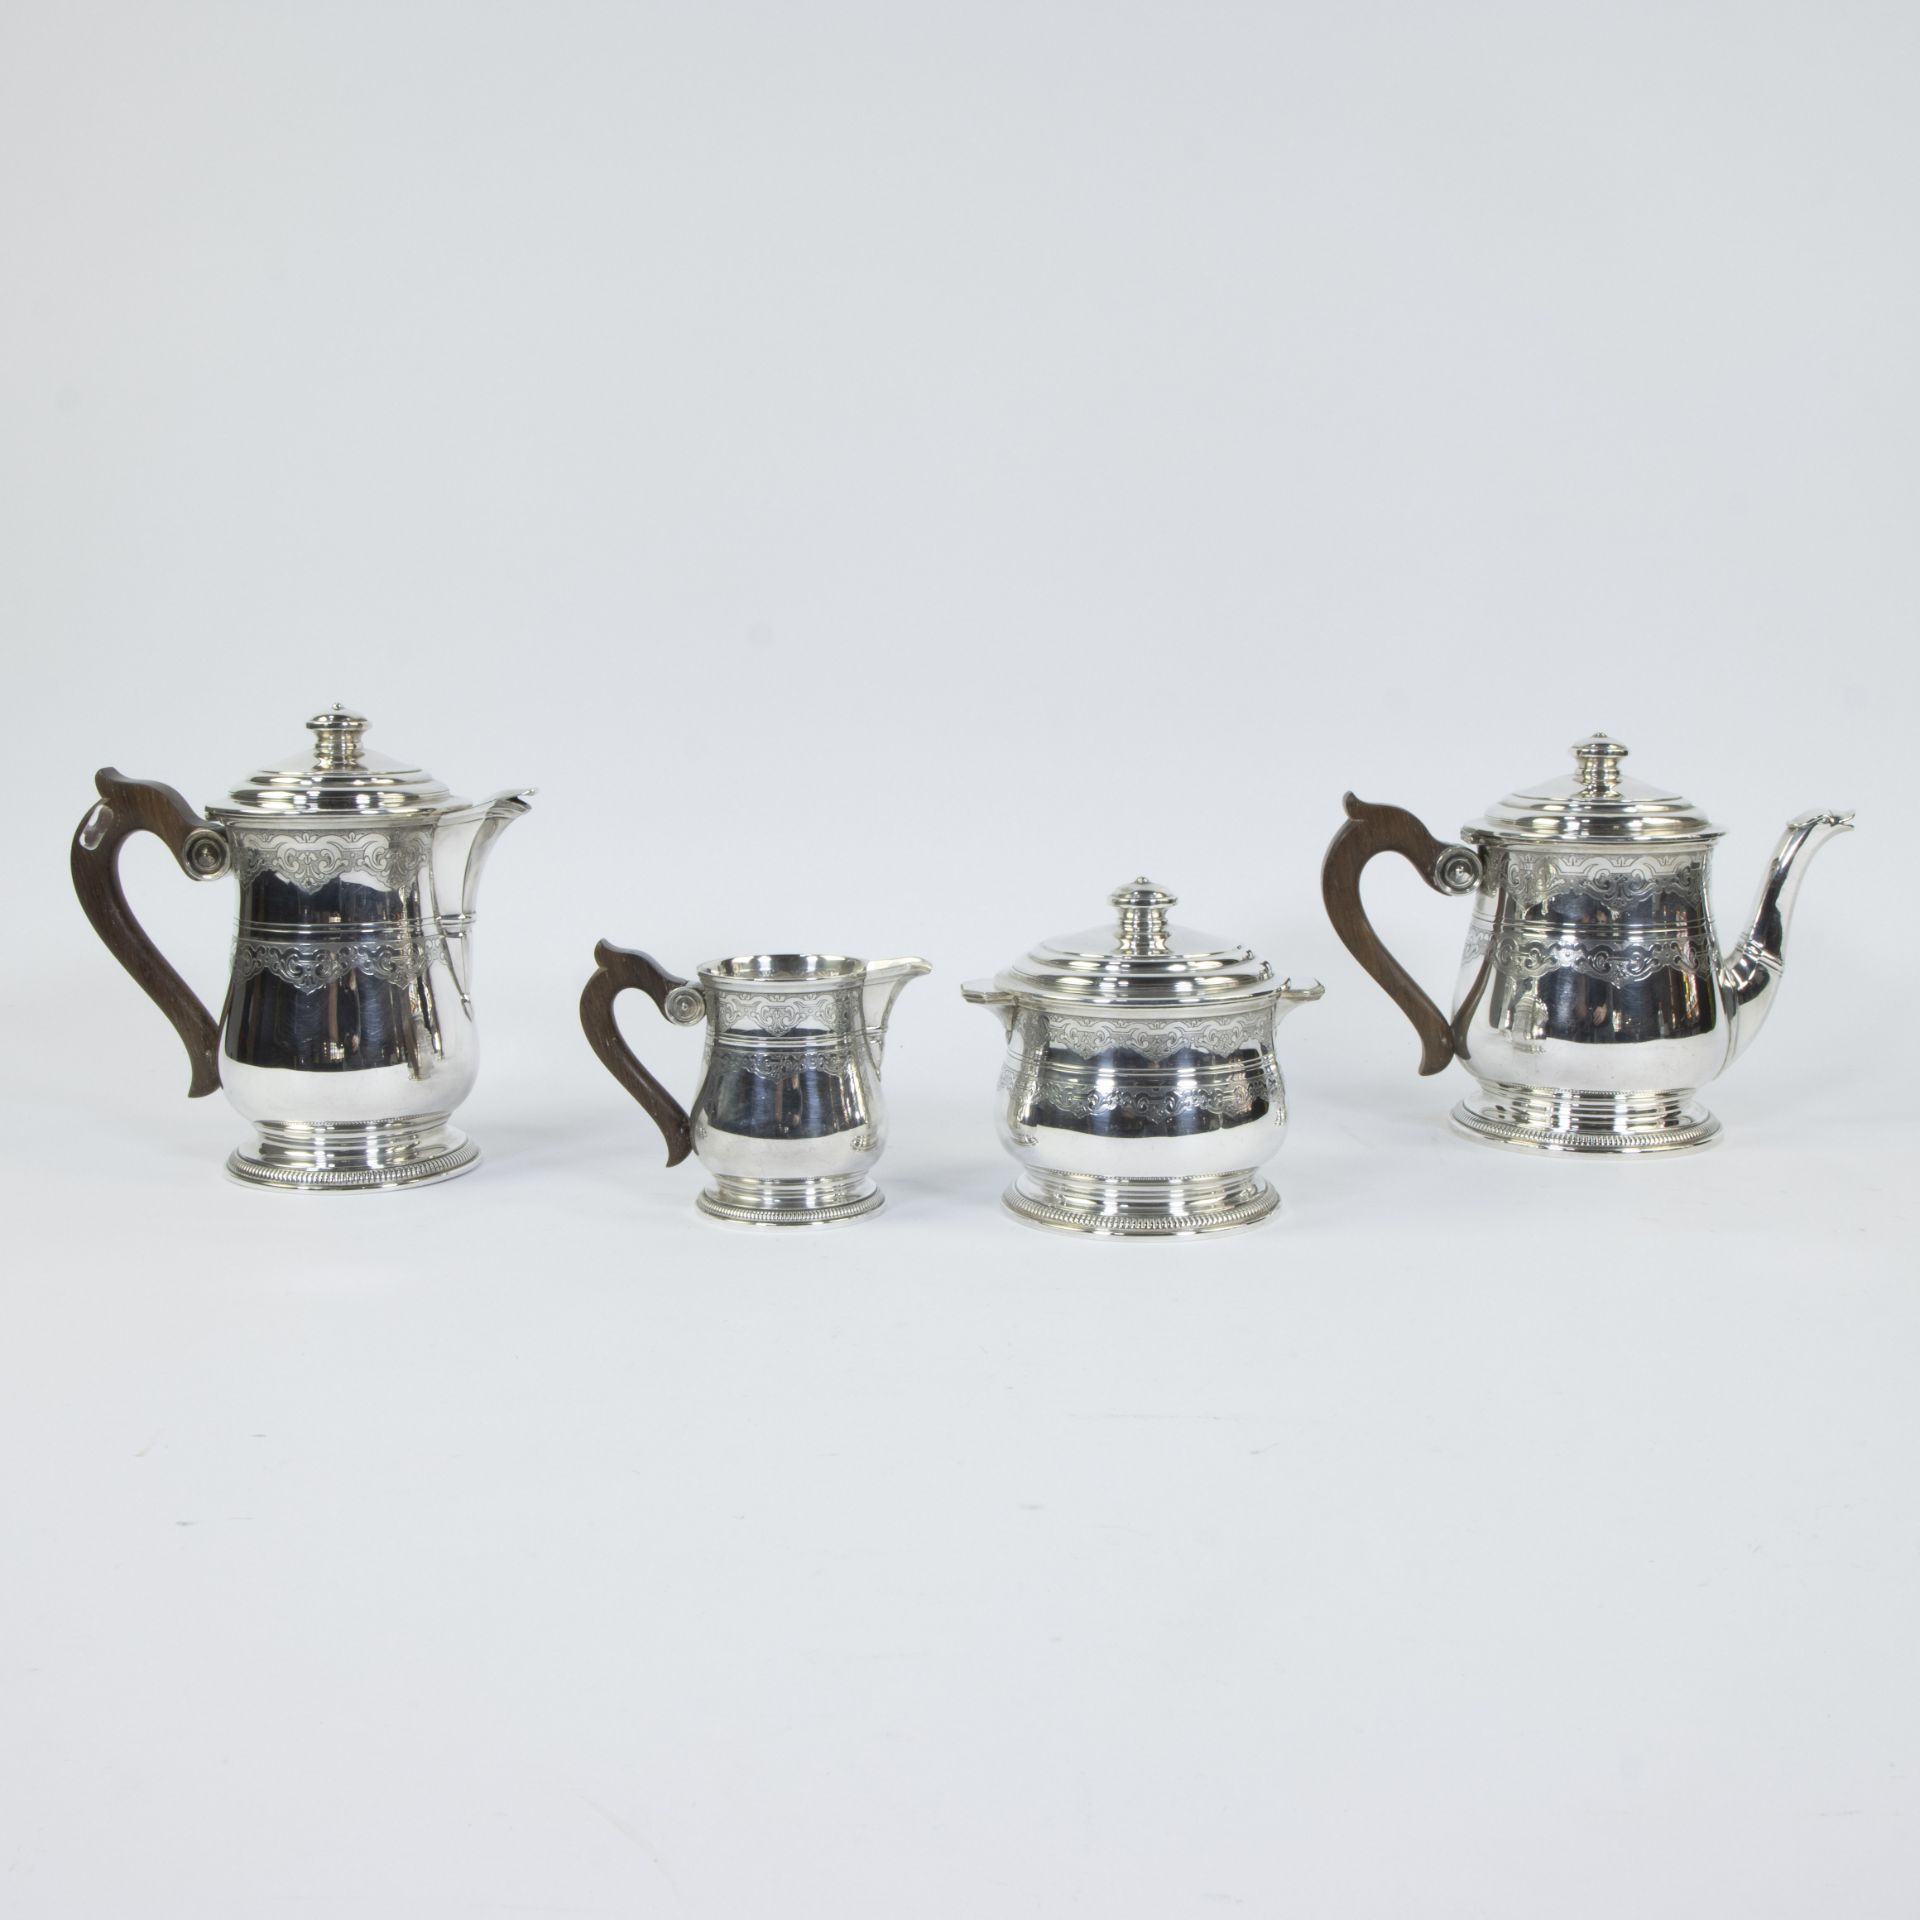 English silver coffee and tea set, weight 1930 grams - Image 3 of 4